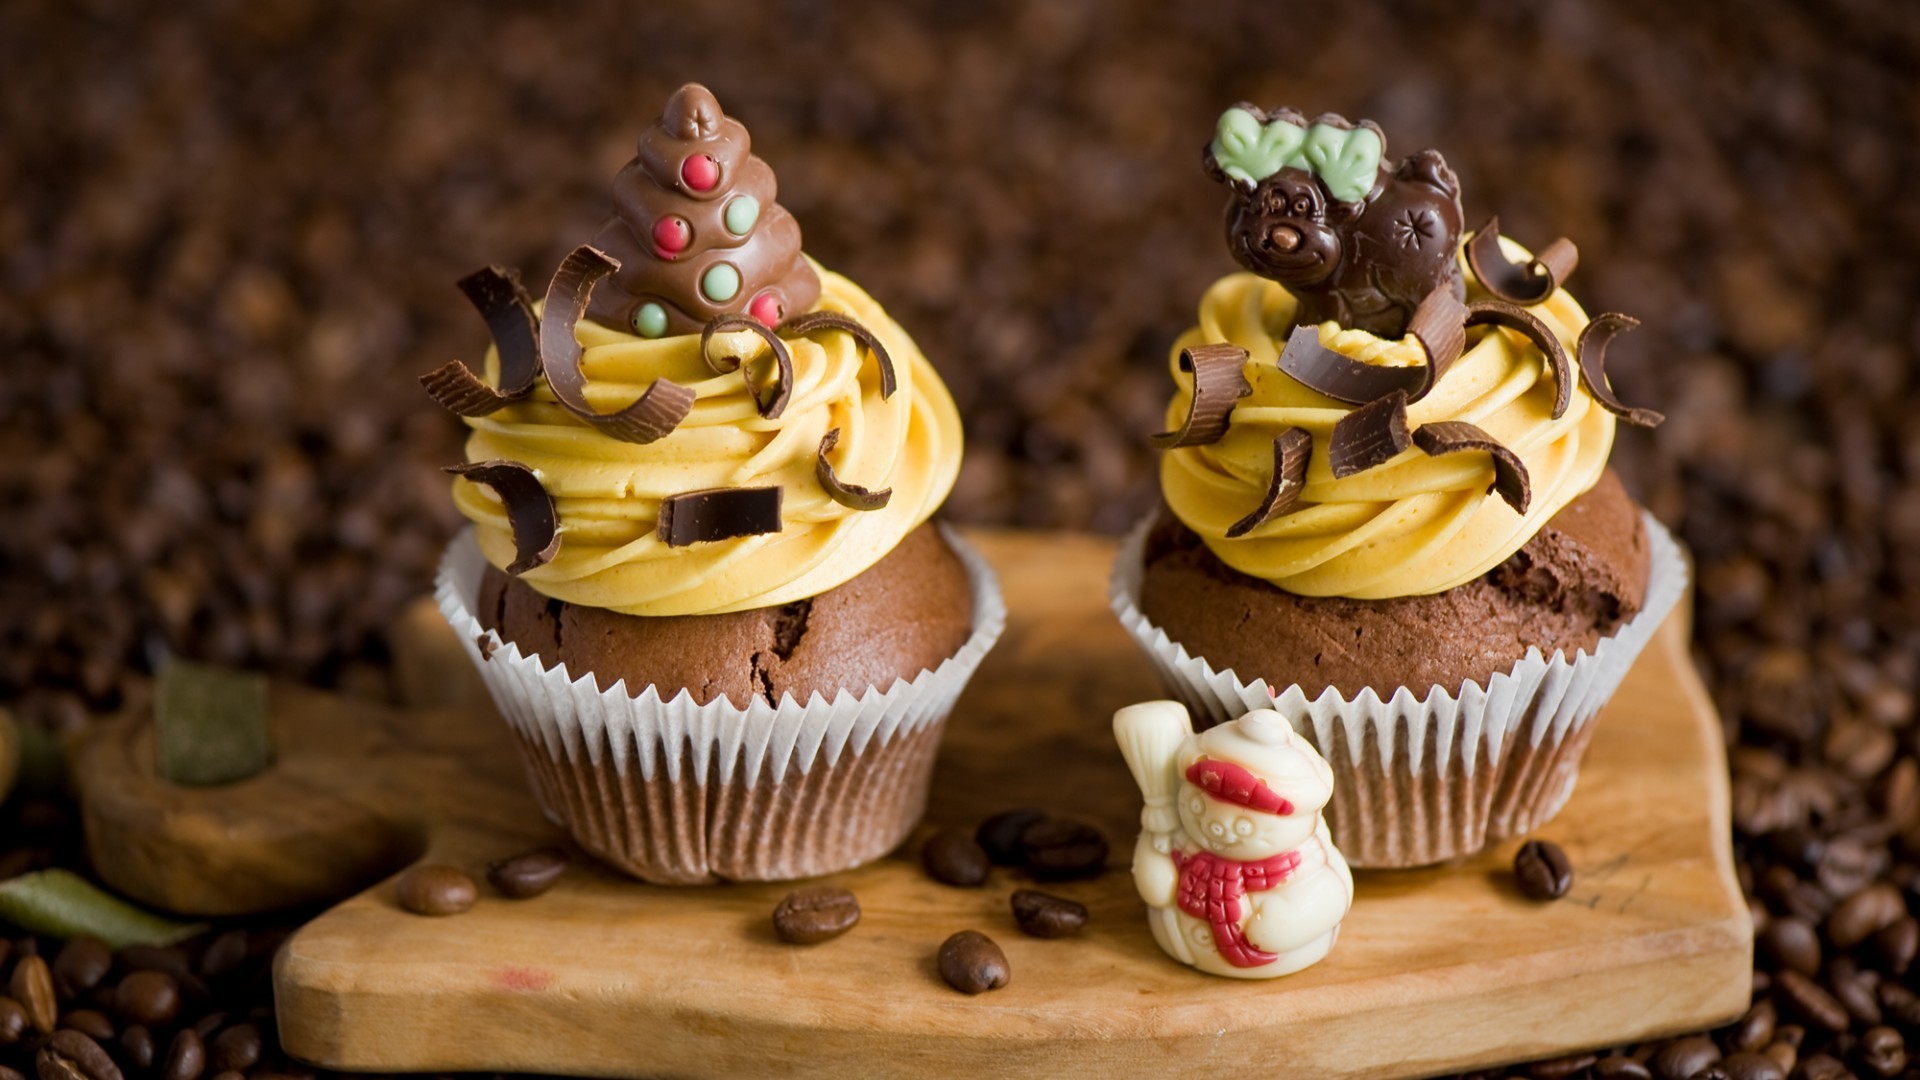 General 1920x1080 cupcakes food dessert chocolate sweets coffee beans coffee